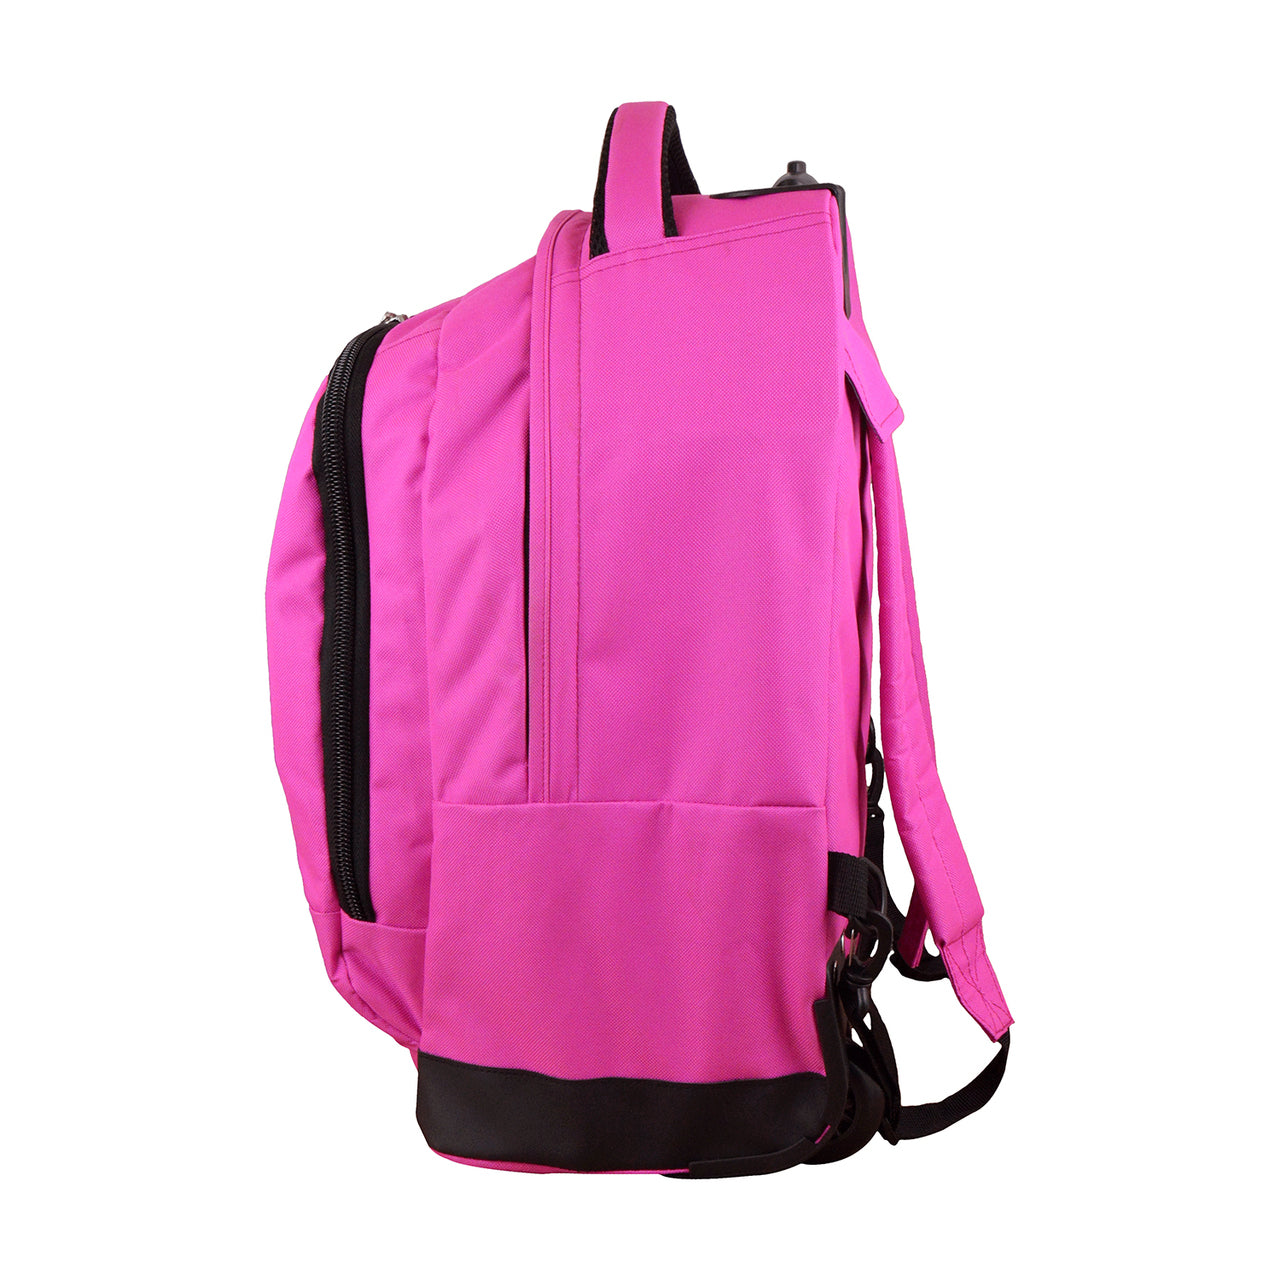 Miami Marlins Premium Wheeled Backpack in Pink